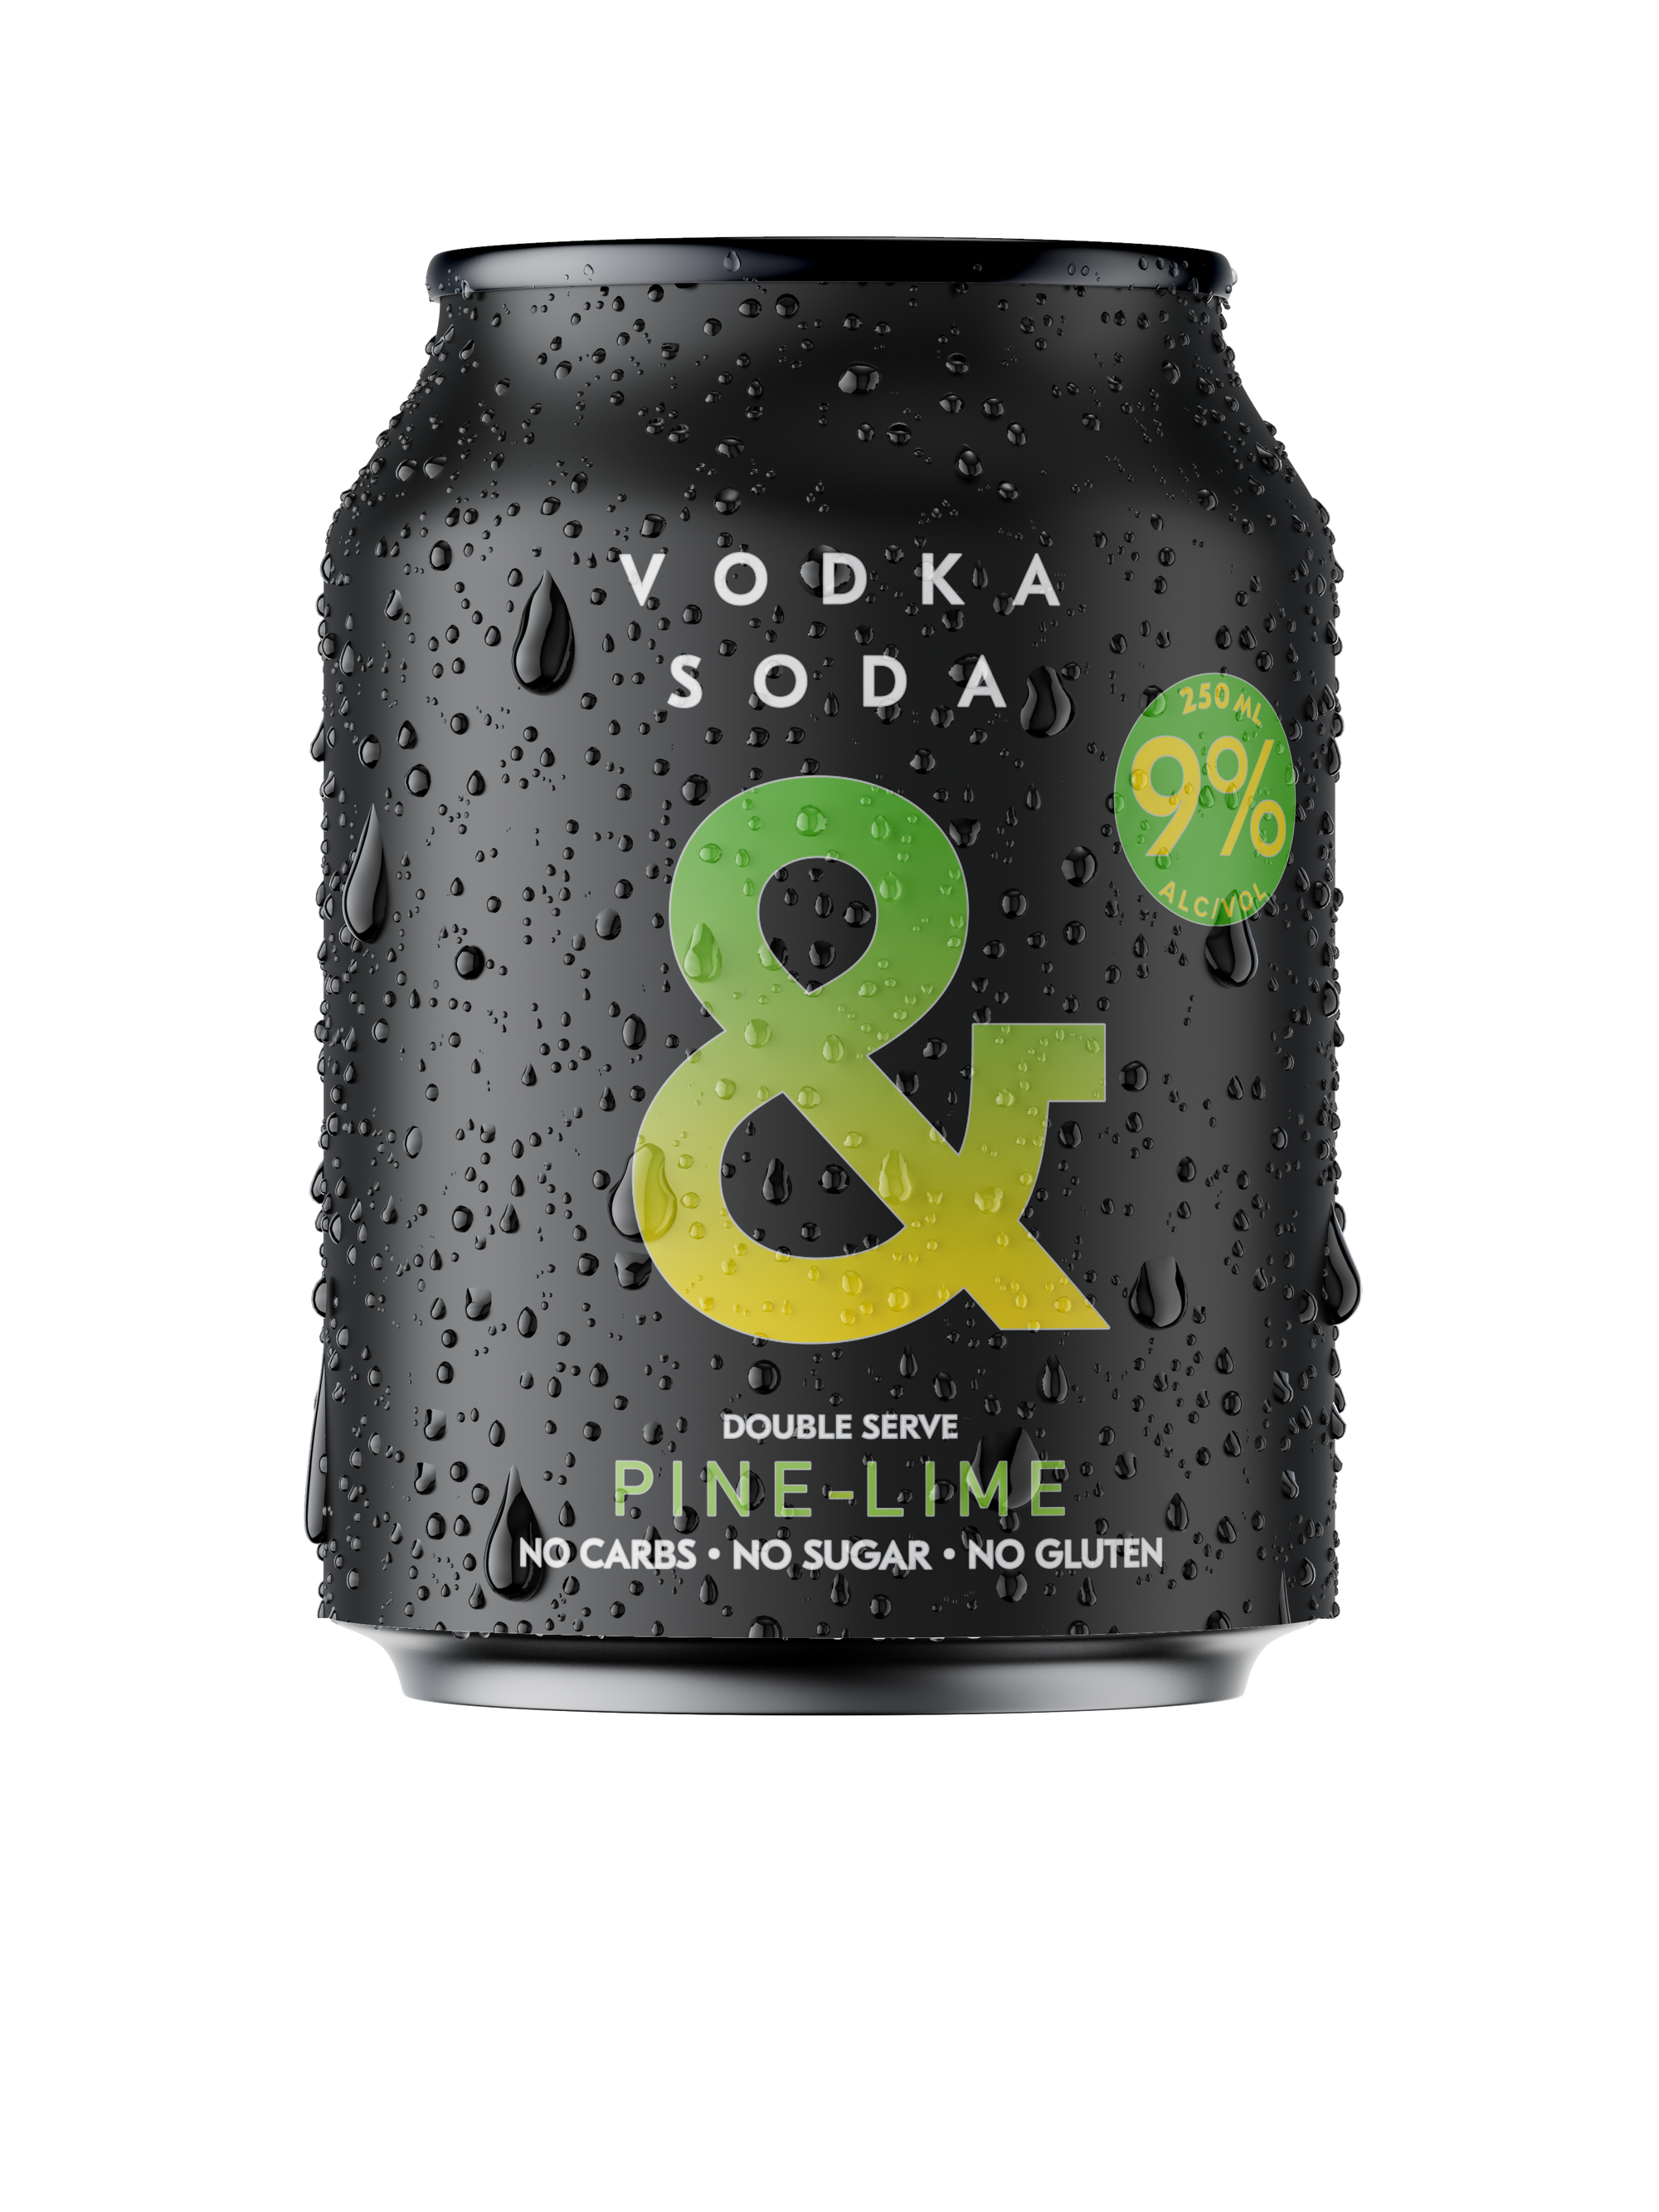 Vodka Soda & Pine Lime Cans 9.0% (24 Pack)